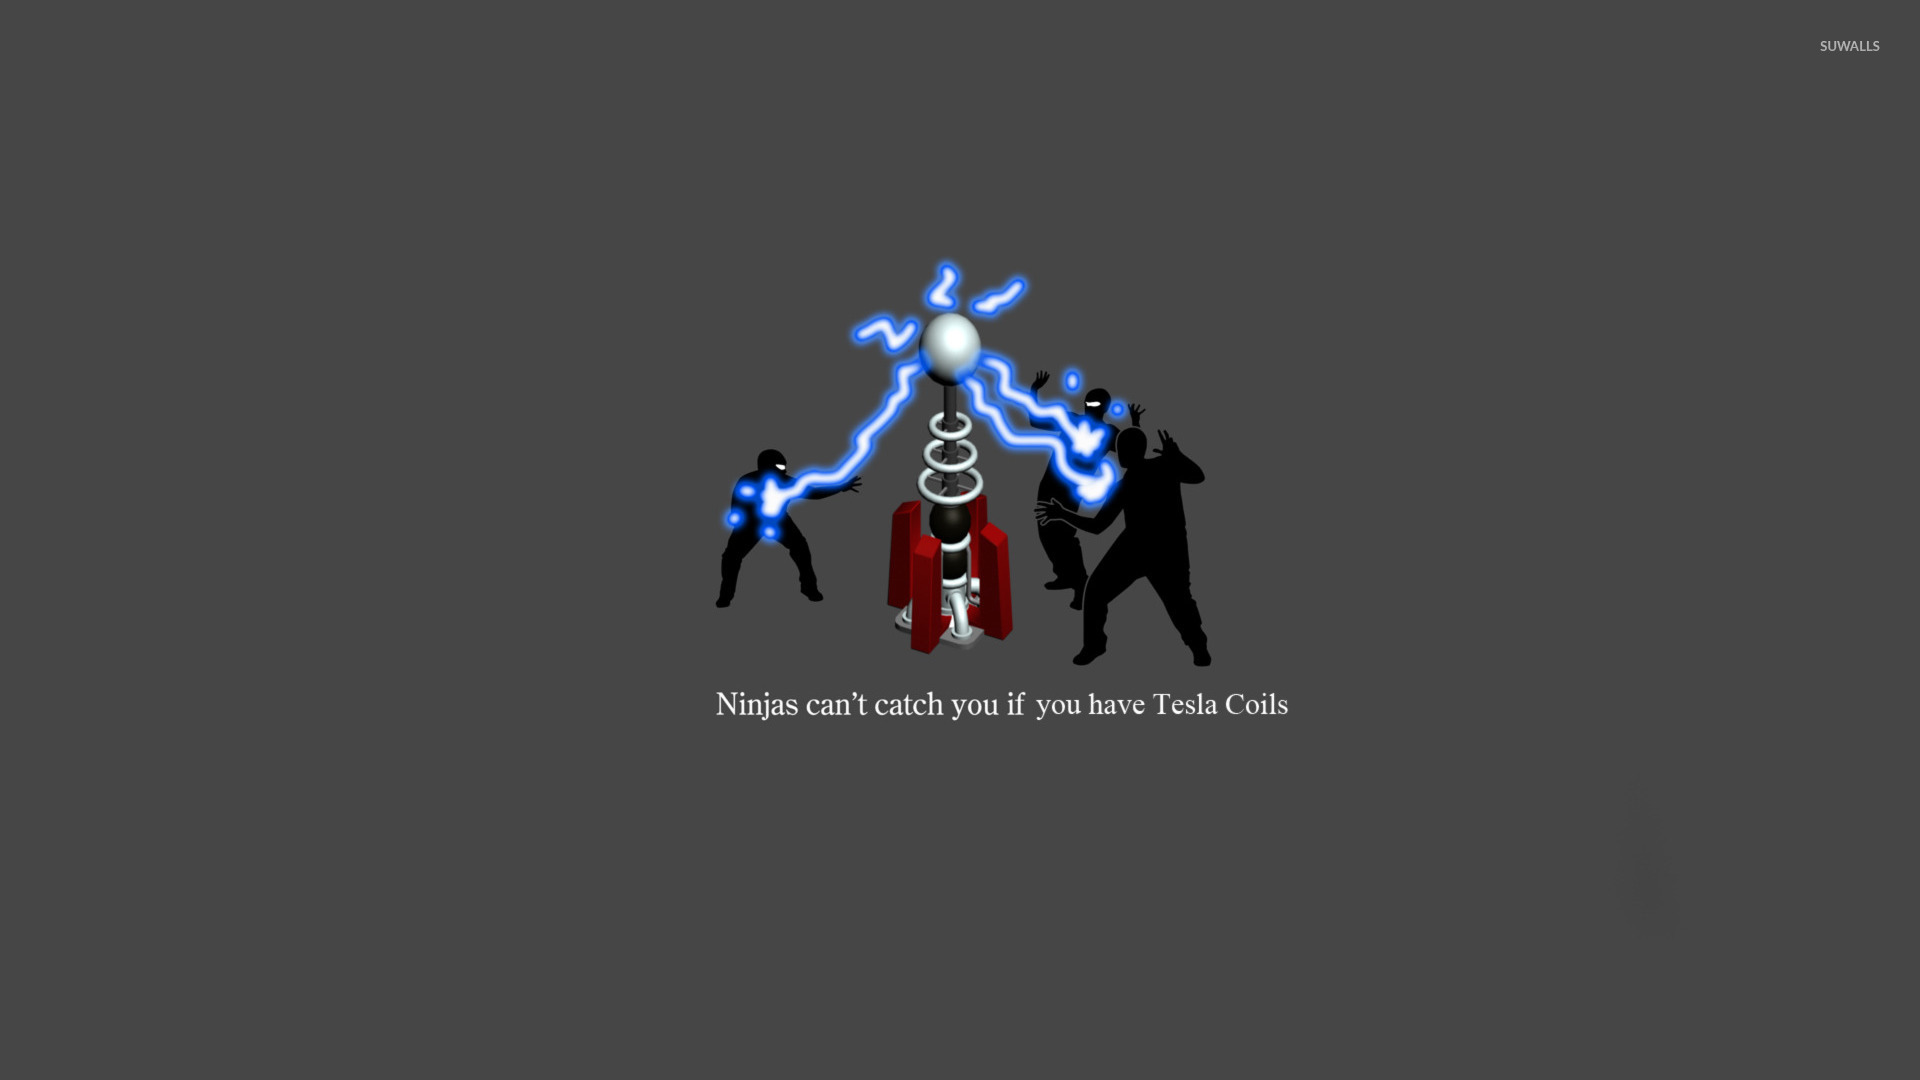  catch you if you have Tesla Coils wallpaper   Meme wallpapers   15117